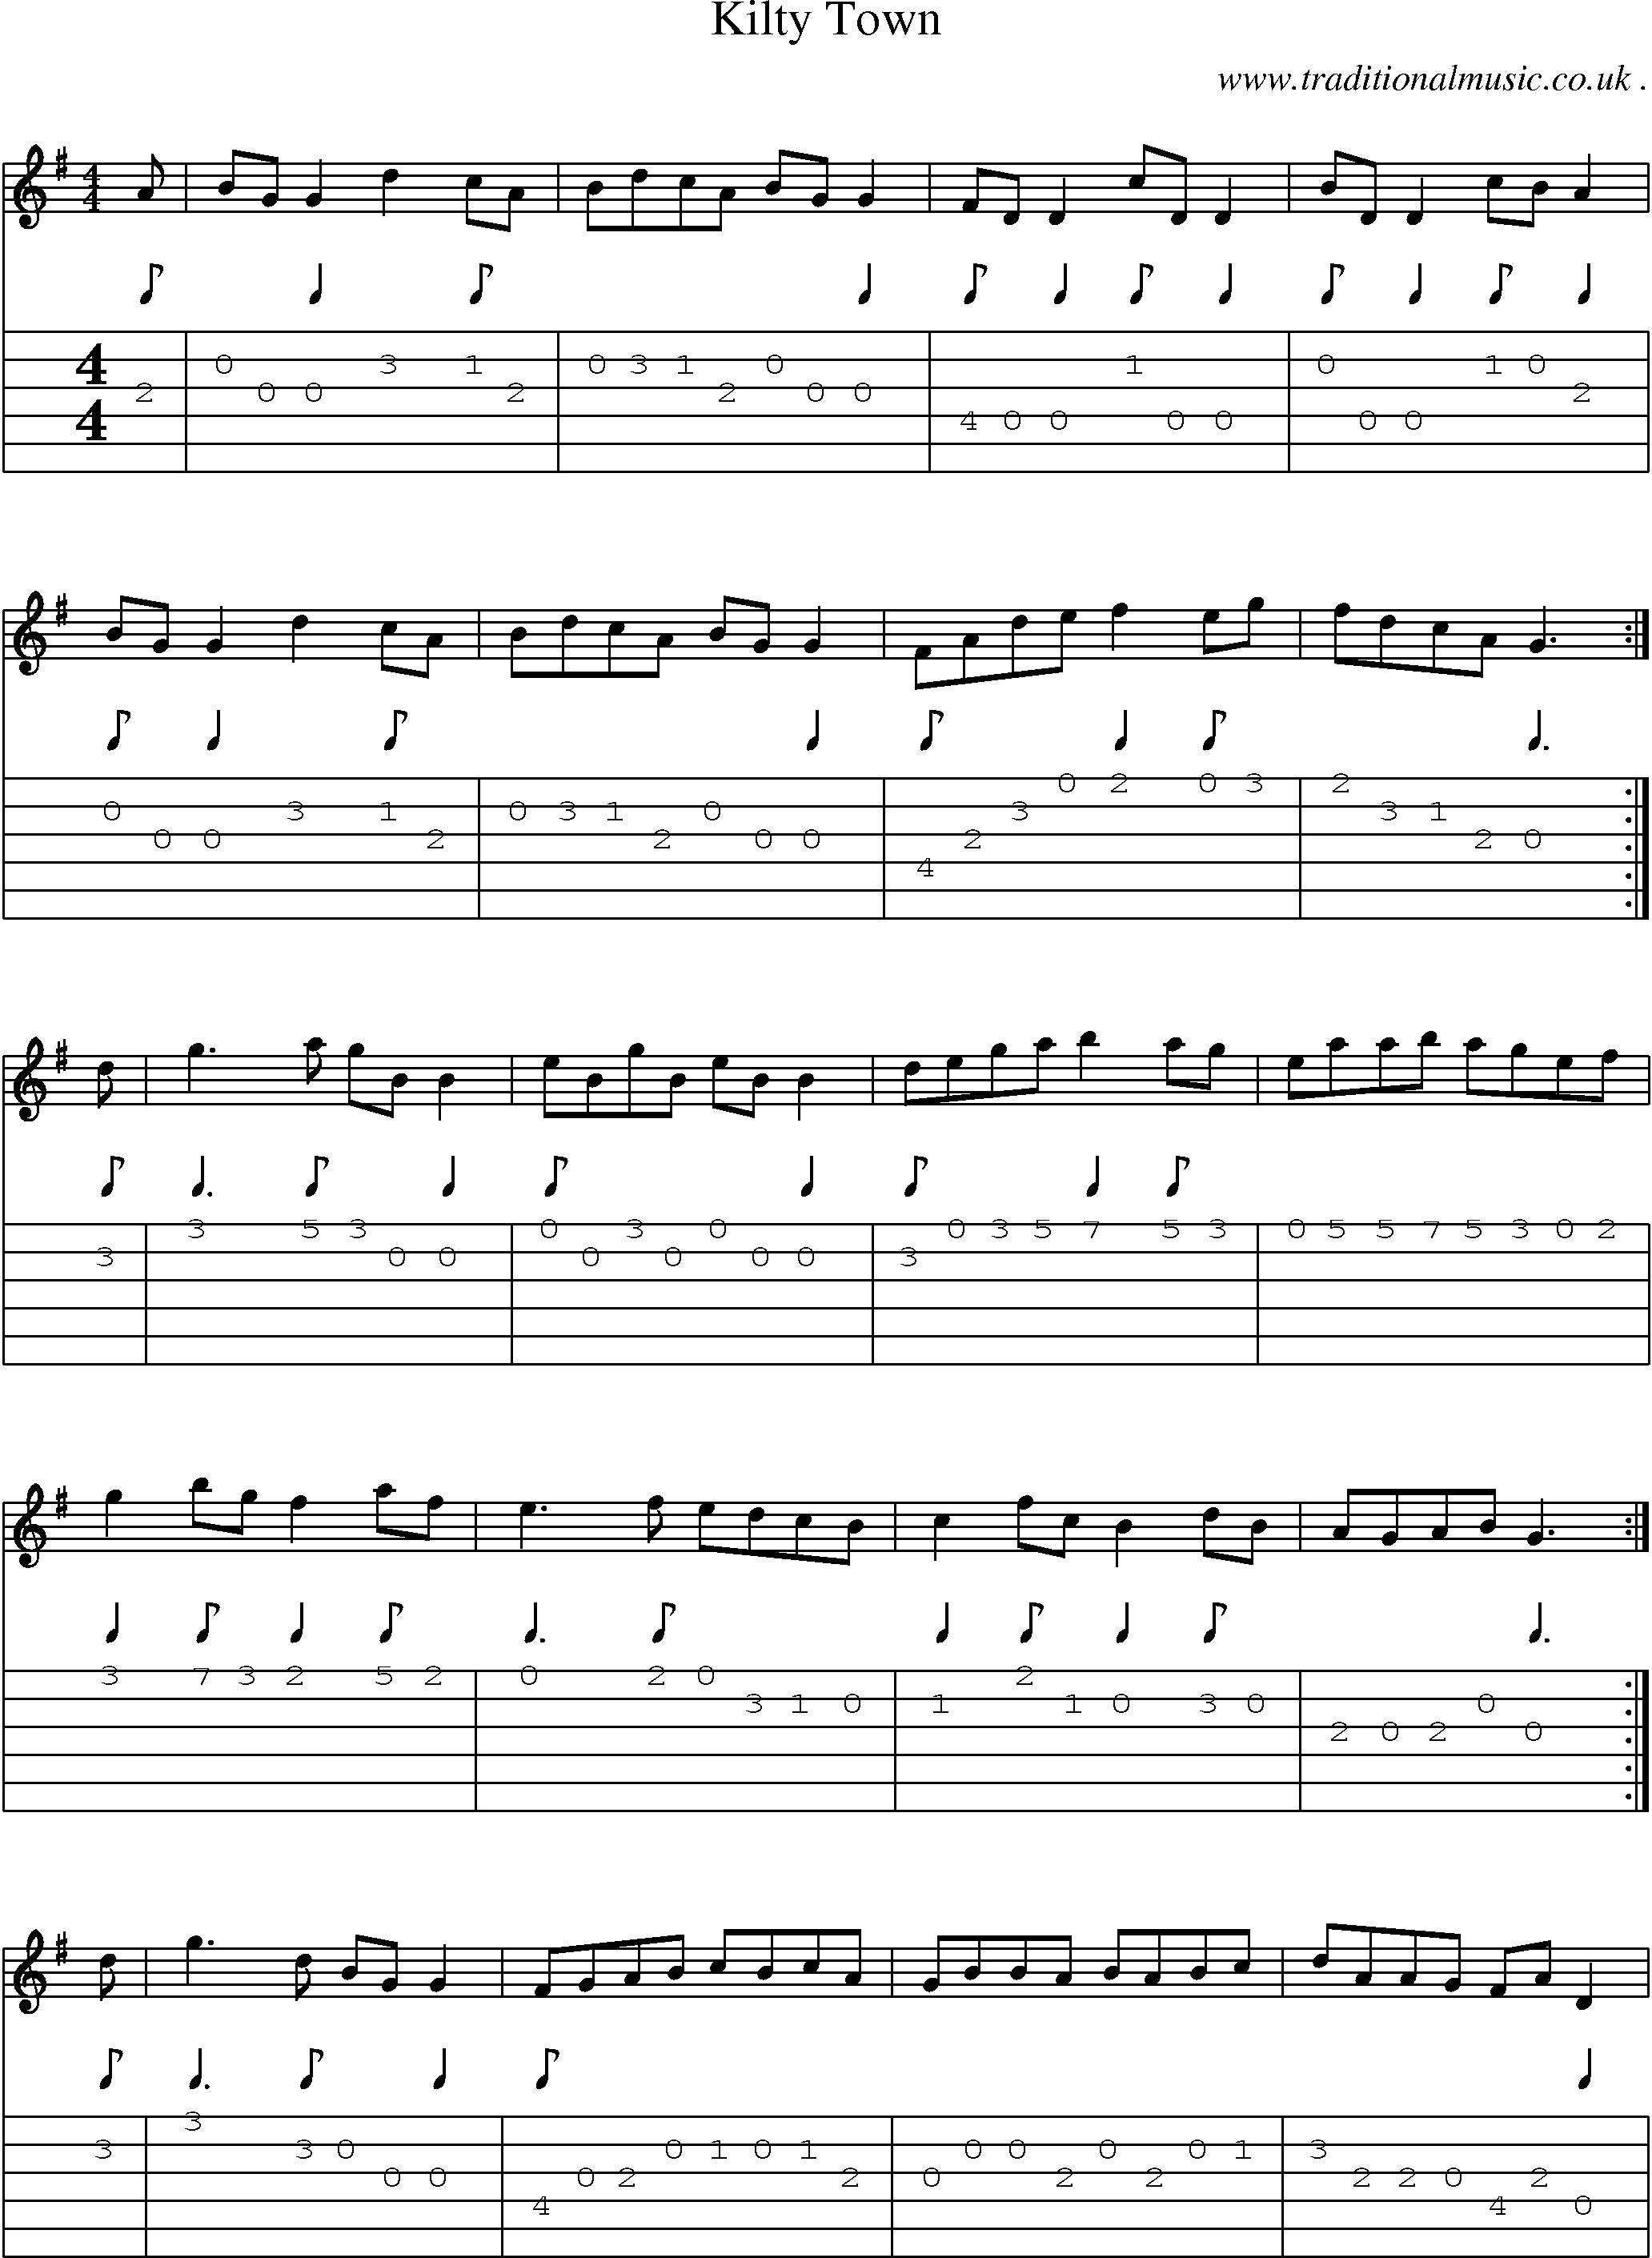 Sheet-Music and Guitar Tabs for Kilty Town